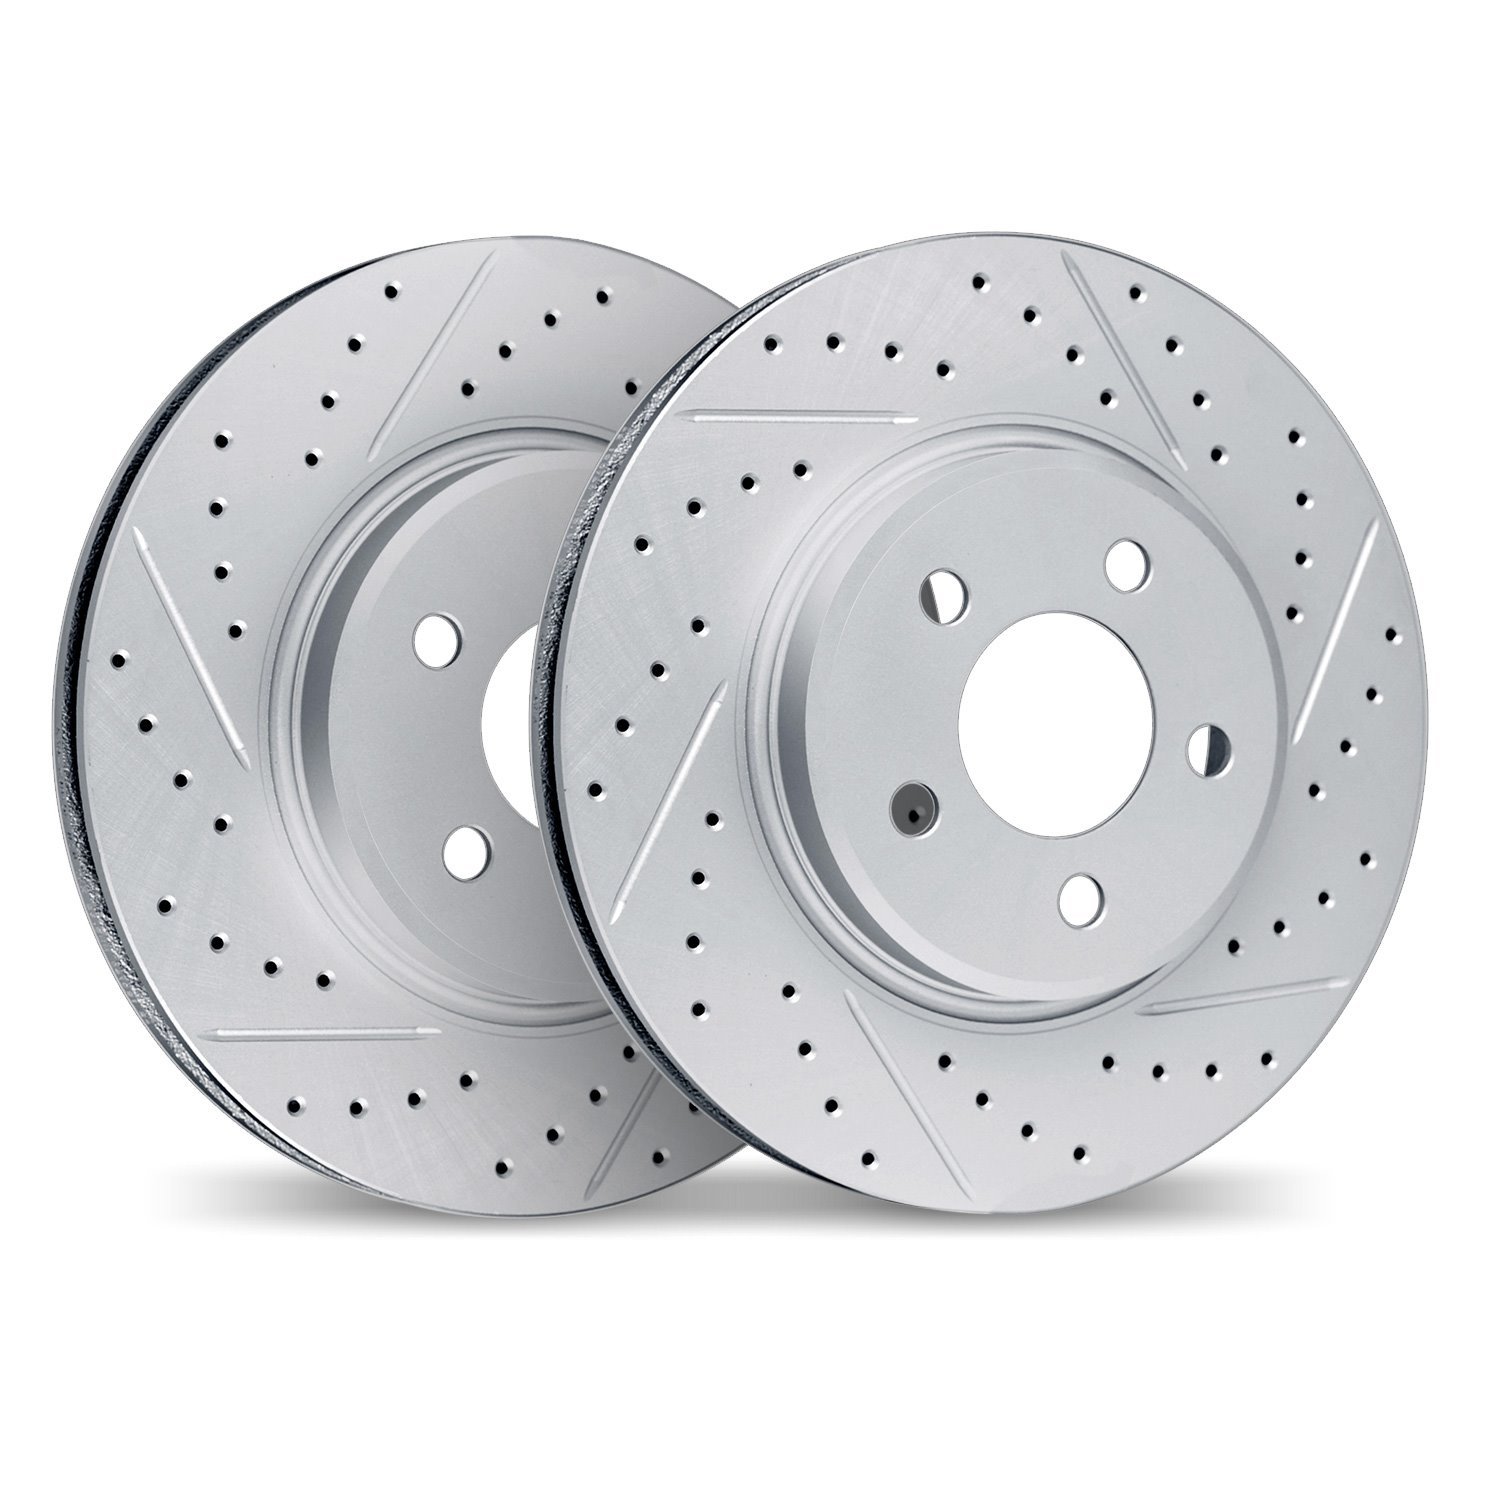 2002-56001 Geoperformance Drilled/Slotted Brake Rotors, 1998-2002 Ford/Lincoln/Mercury/Mazda, Position: Front